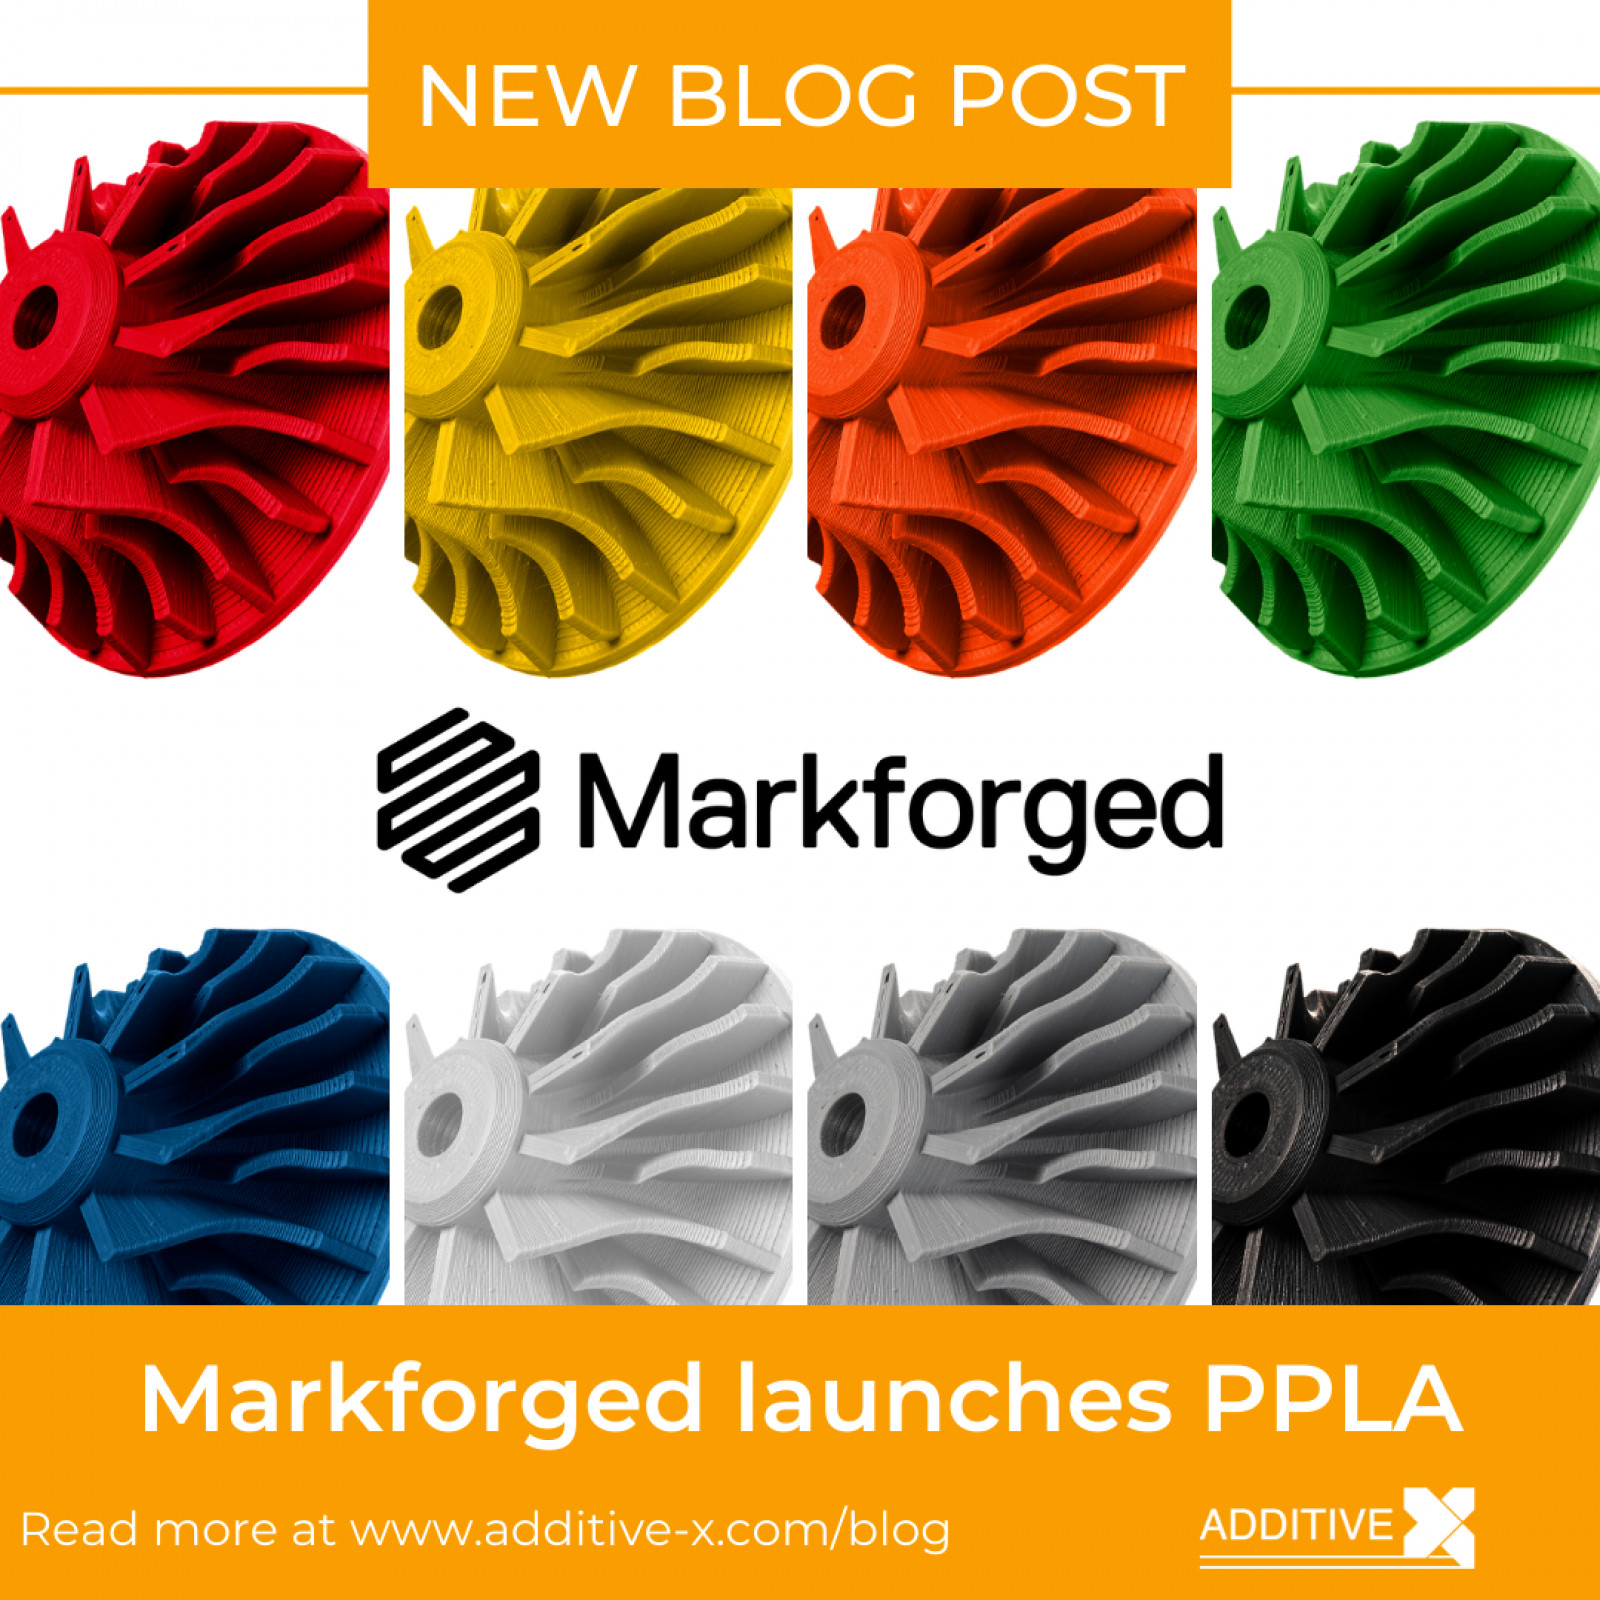 Markforged just got a little more colorful with Pr...